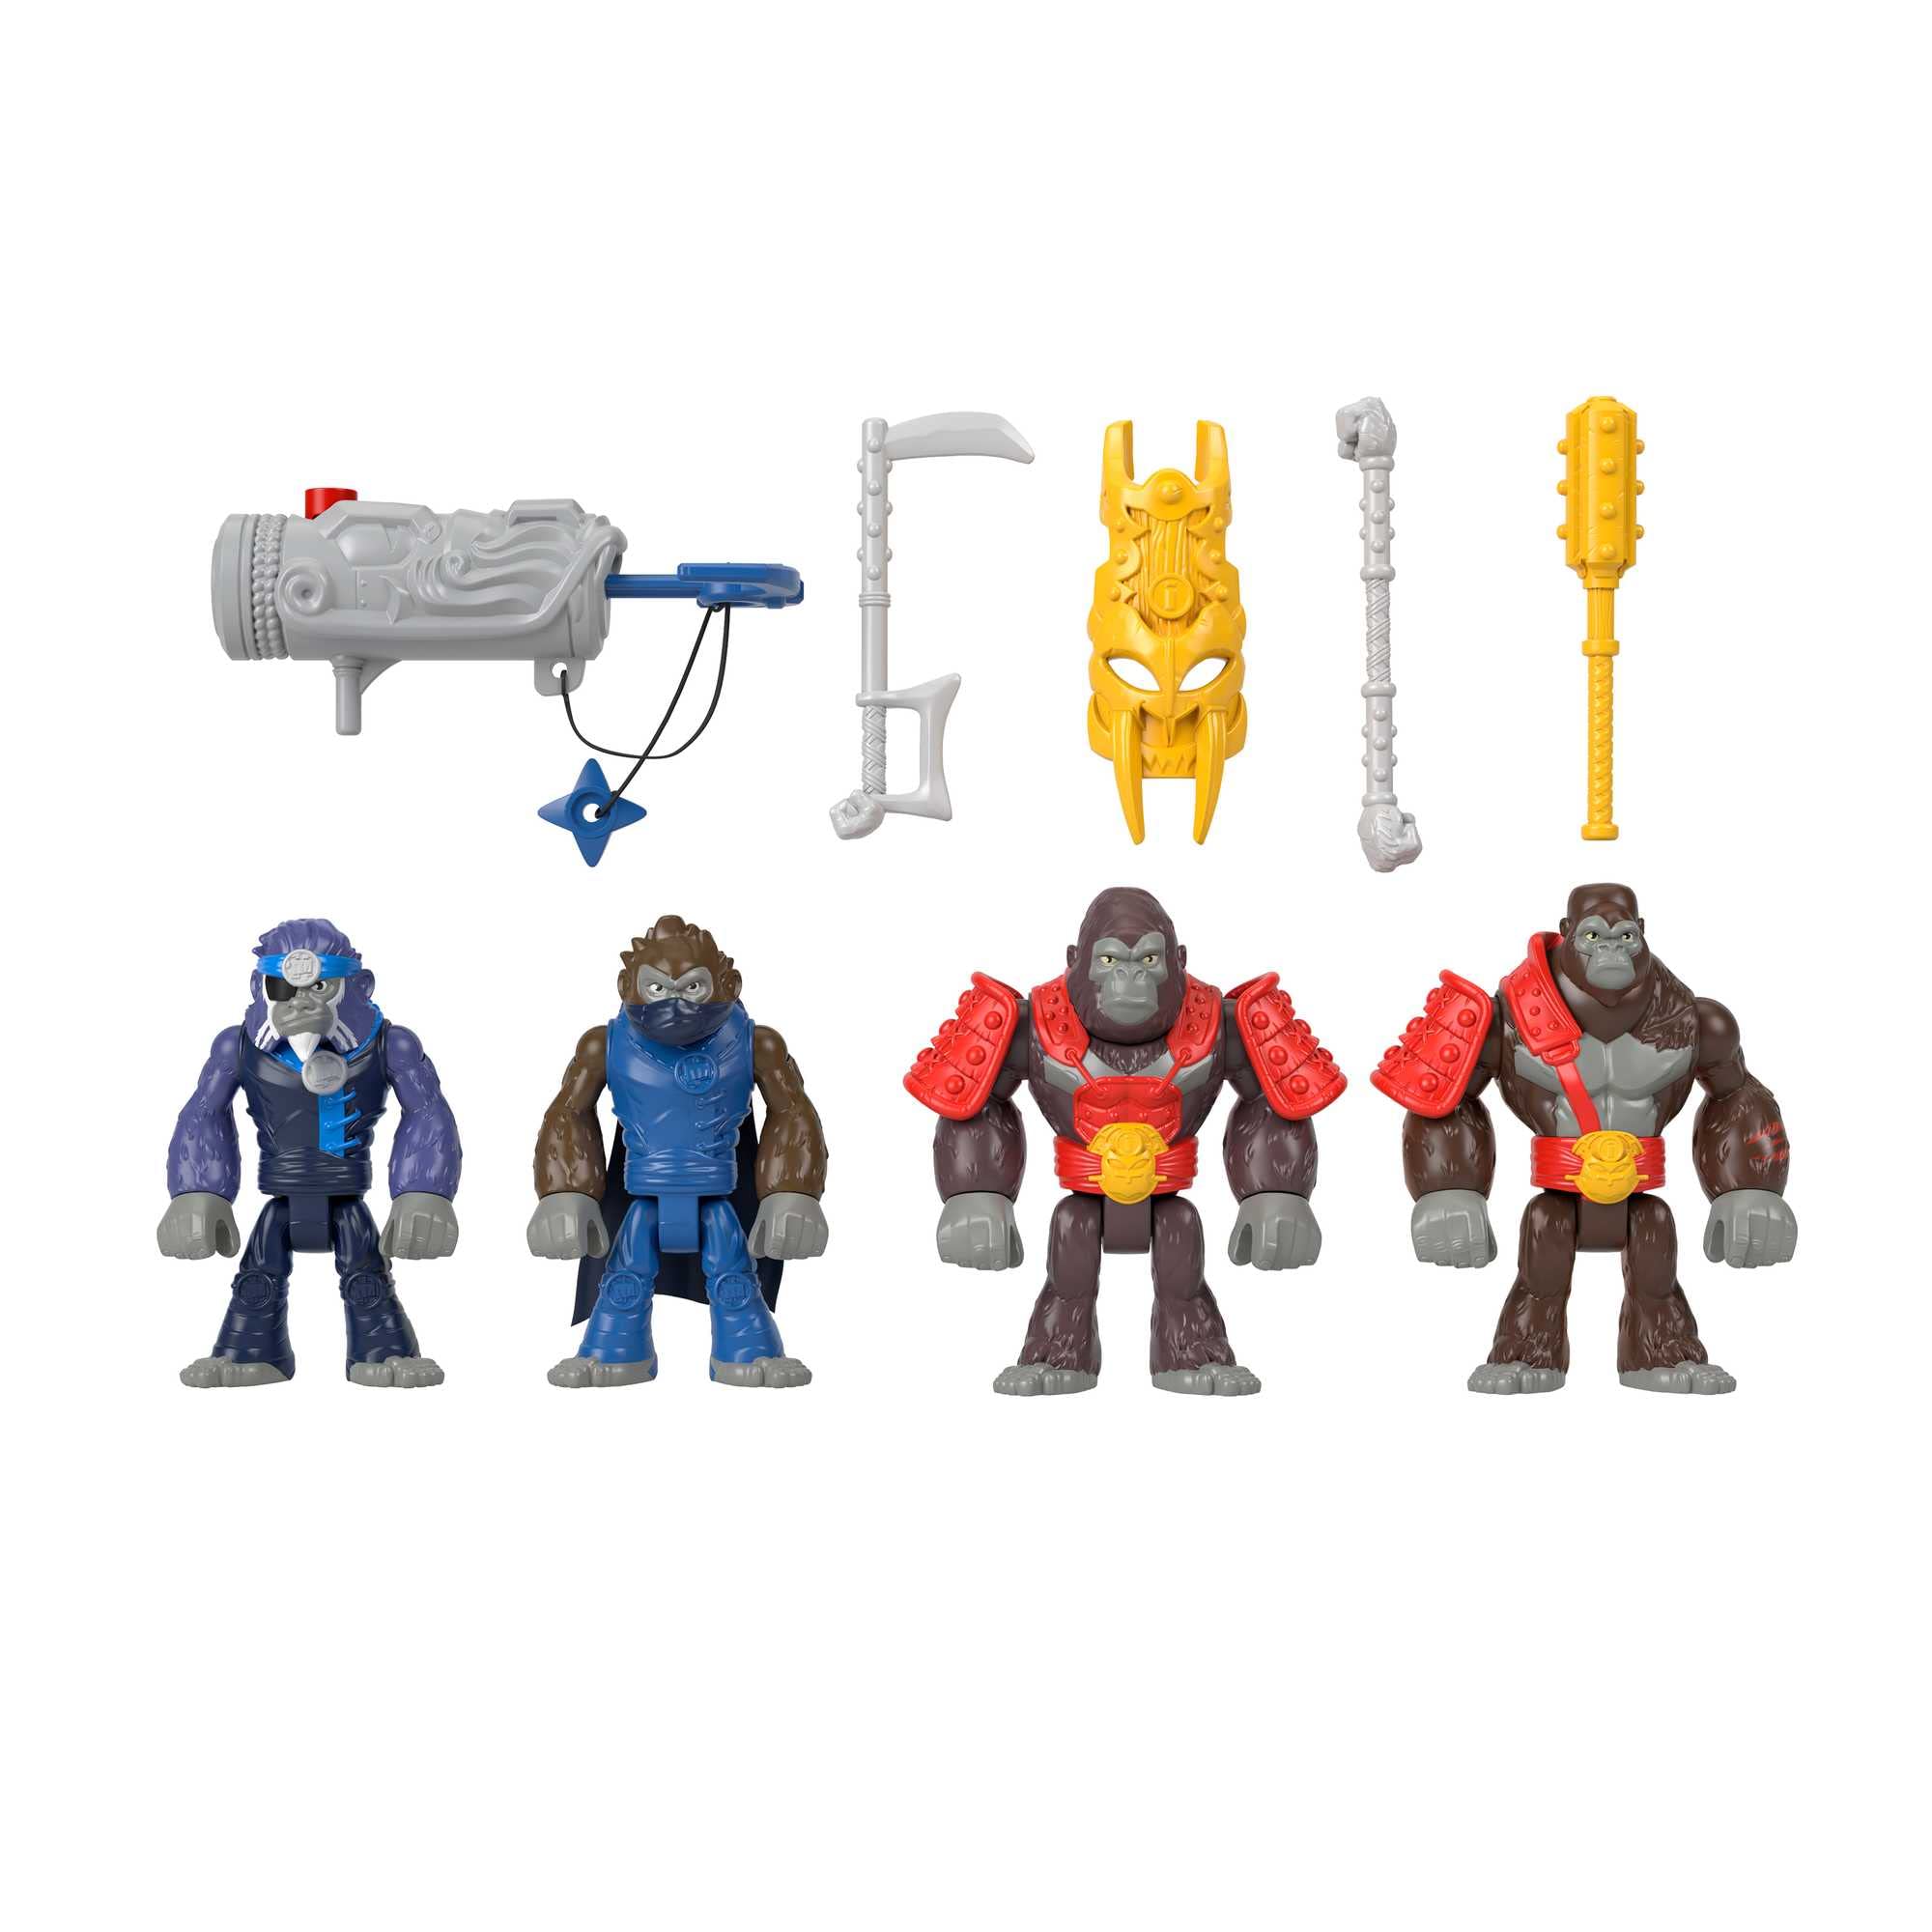 Imaginext Preschool Toys Boss Level Army Pack 9-Piece Monkey & Gorilla Figure Set for Pretend Play Ages 3+ Years